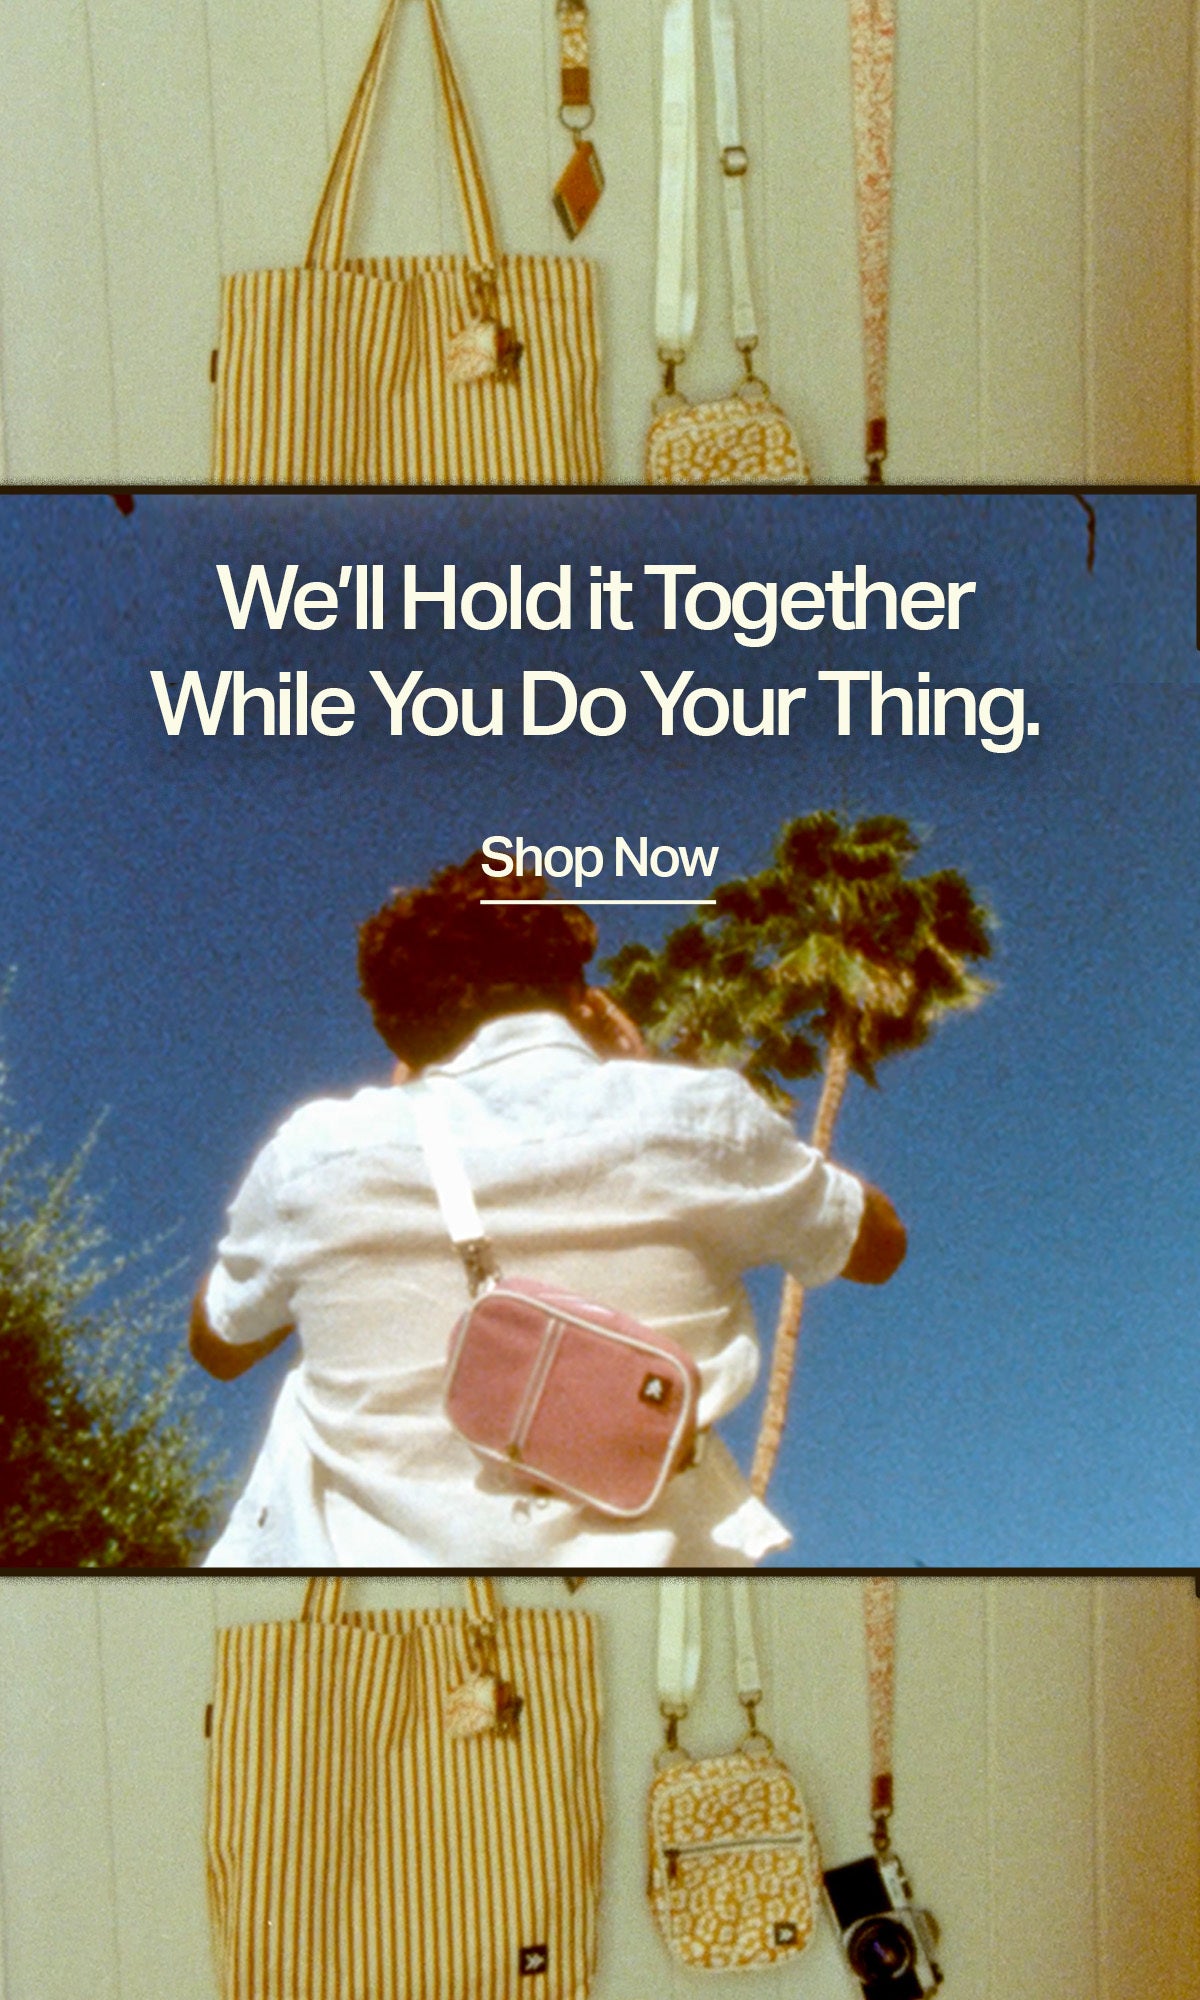 We'll Hold it Together While You Do Your Thing: Shop Now